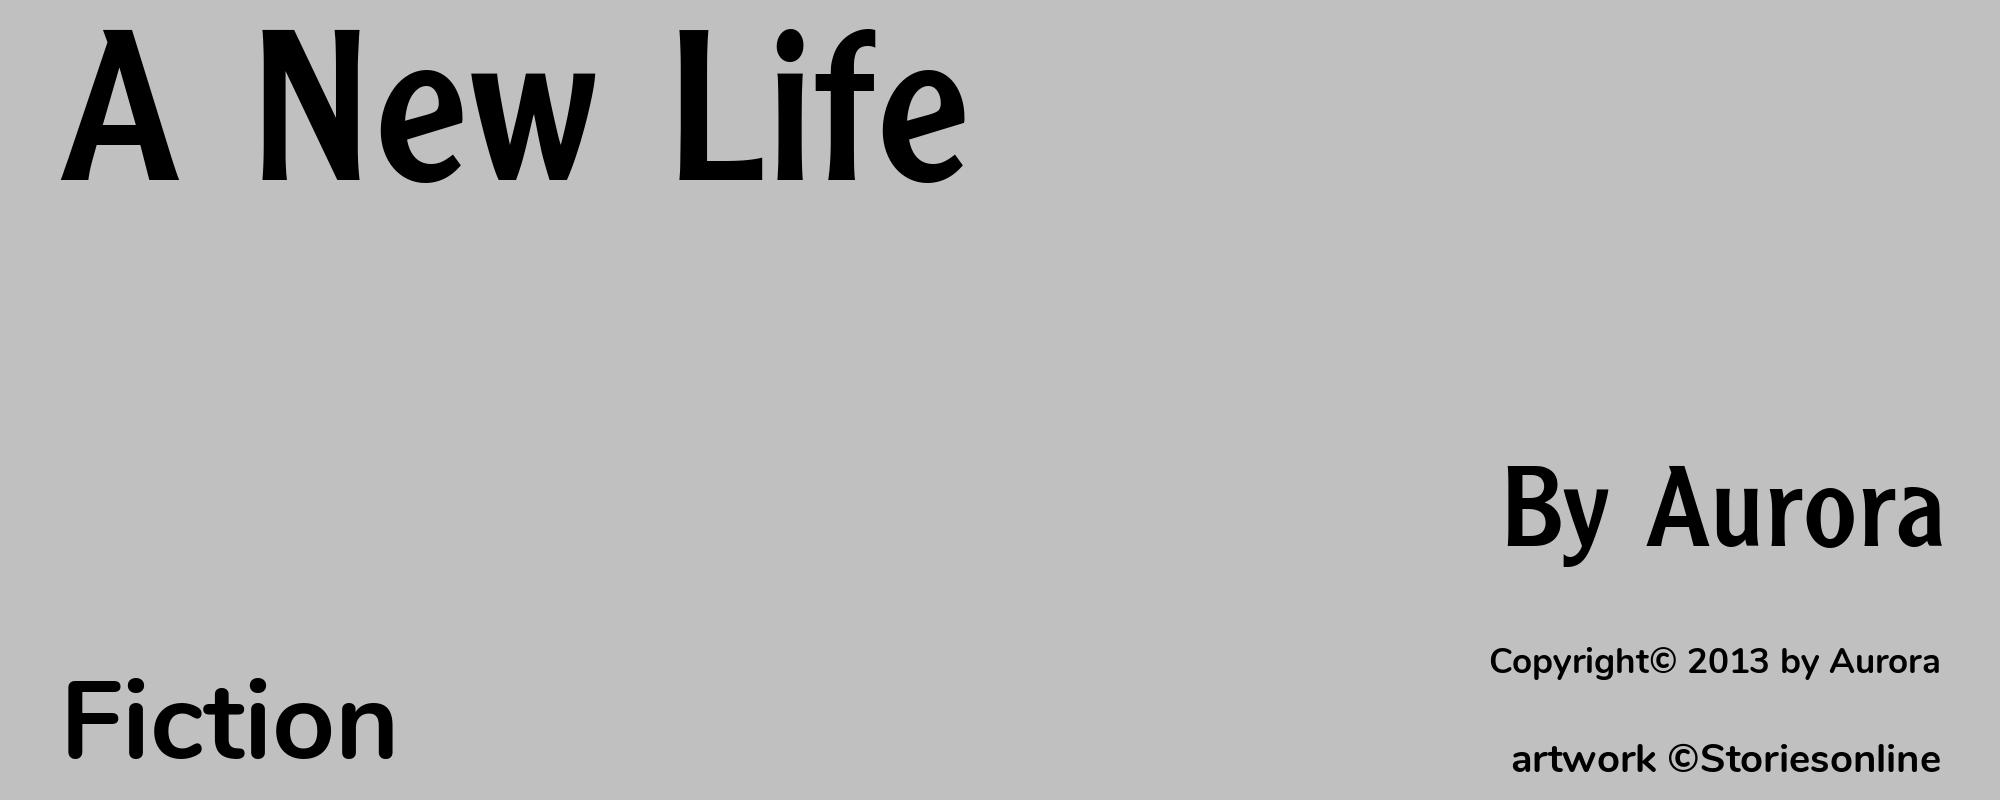 A New Life - Cover